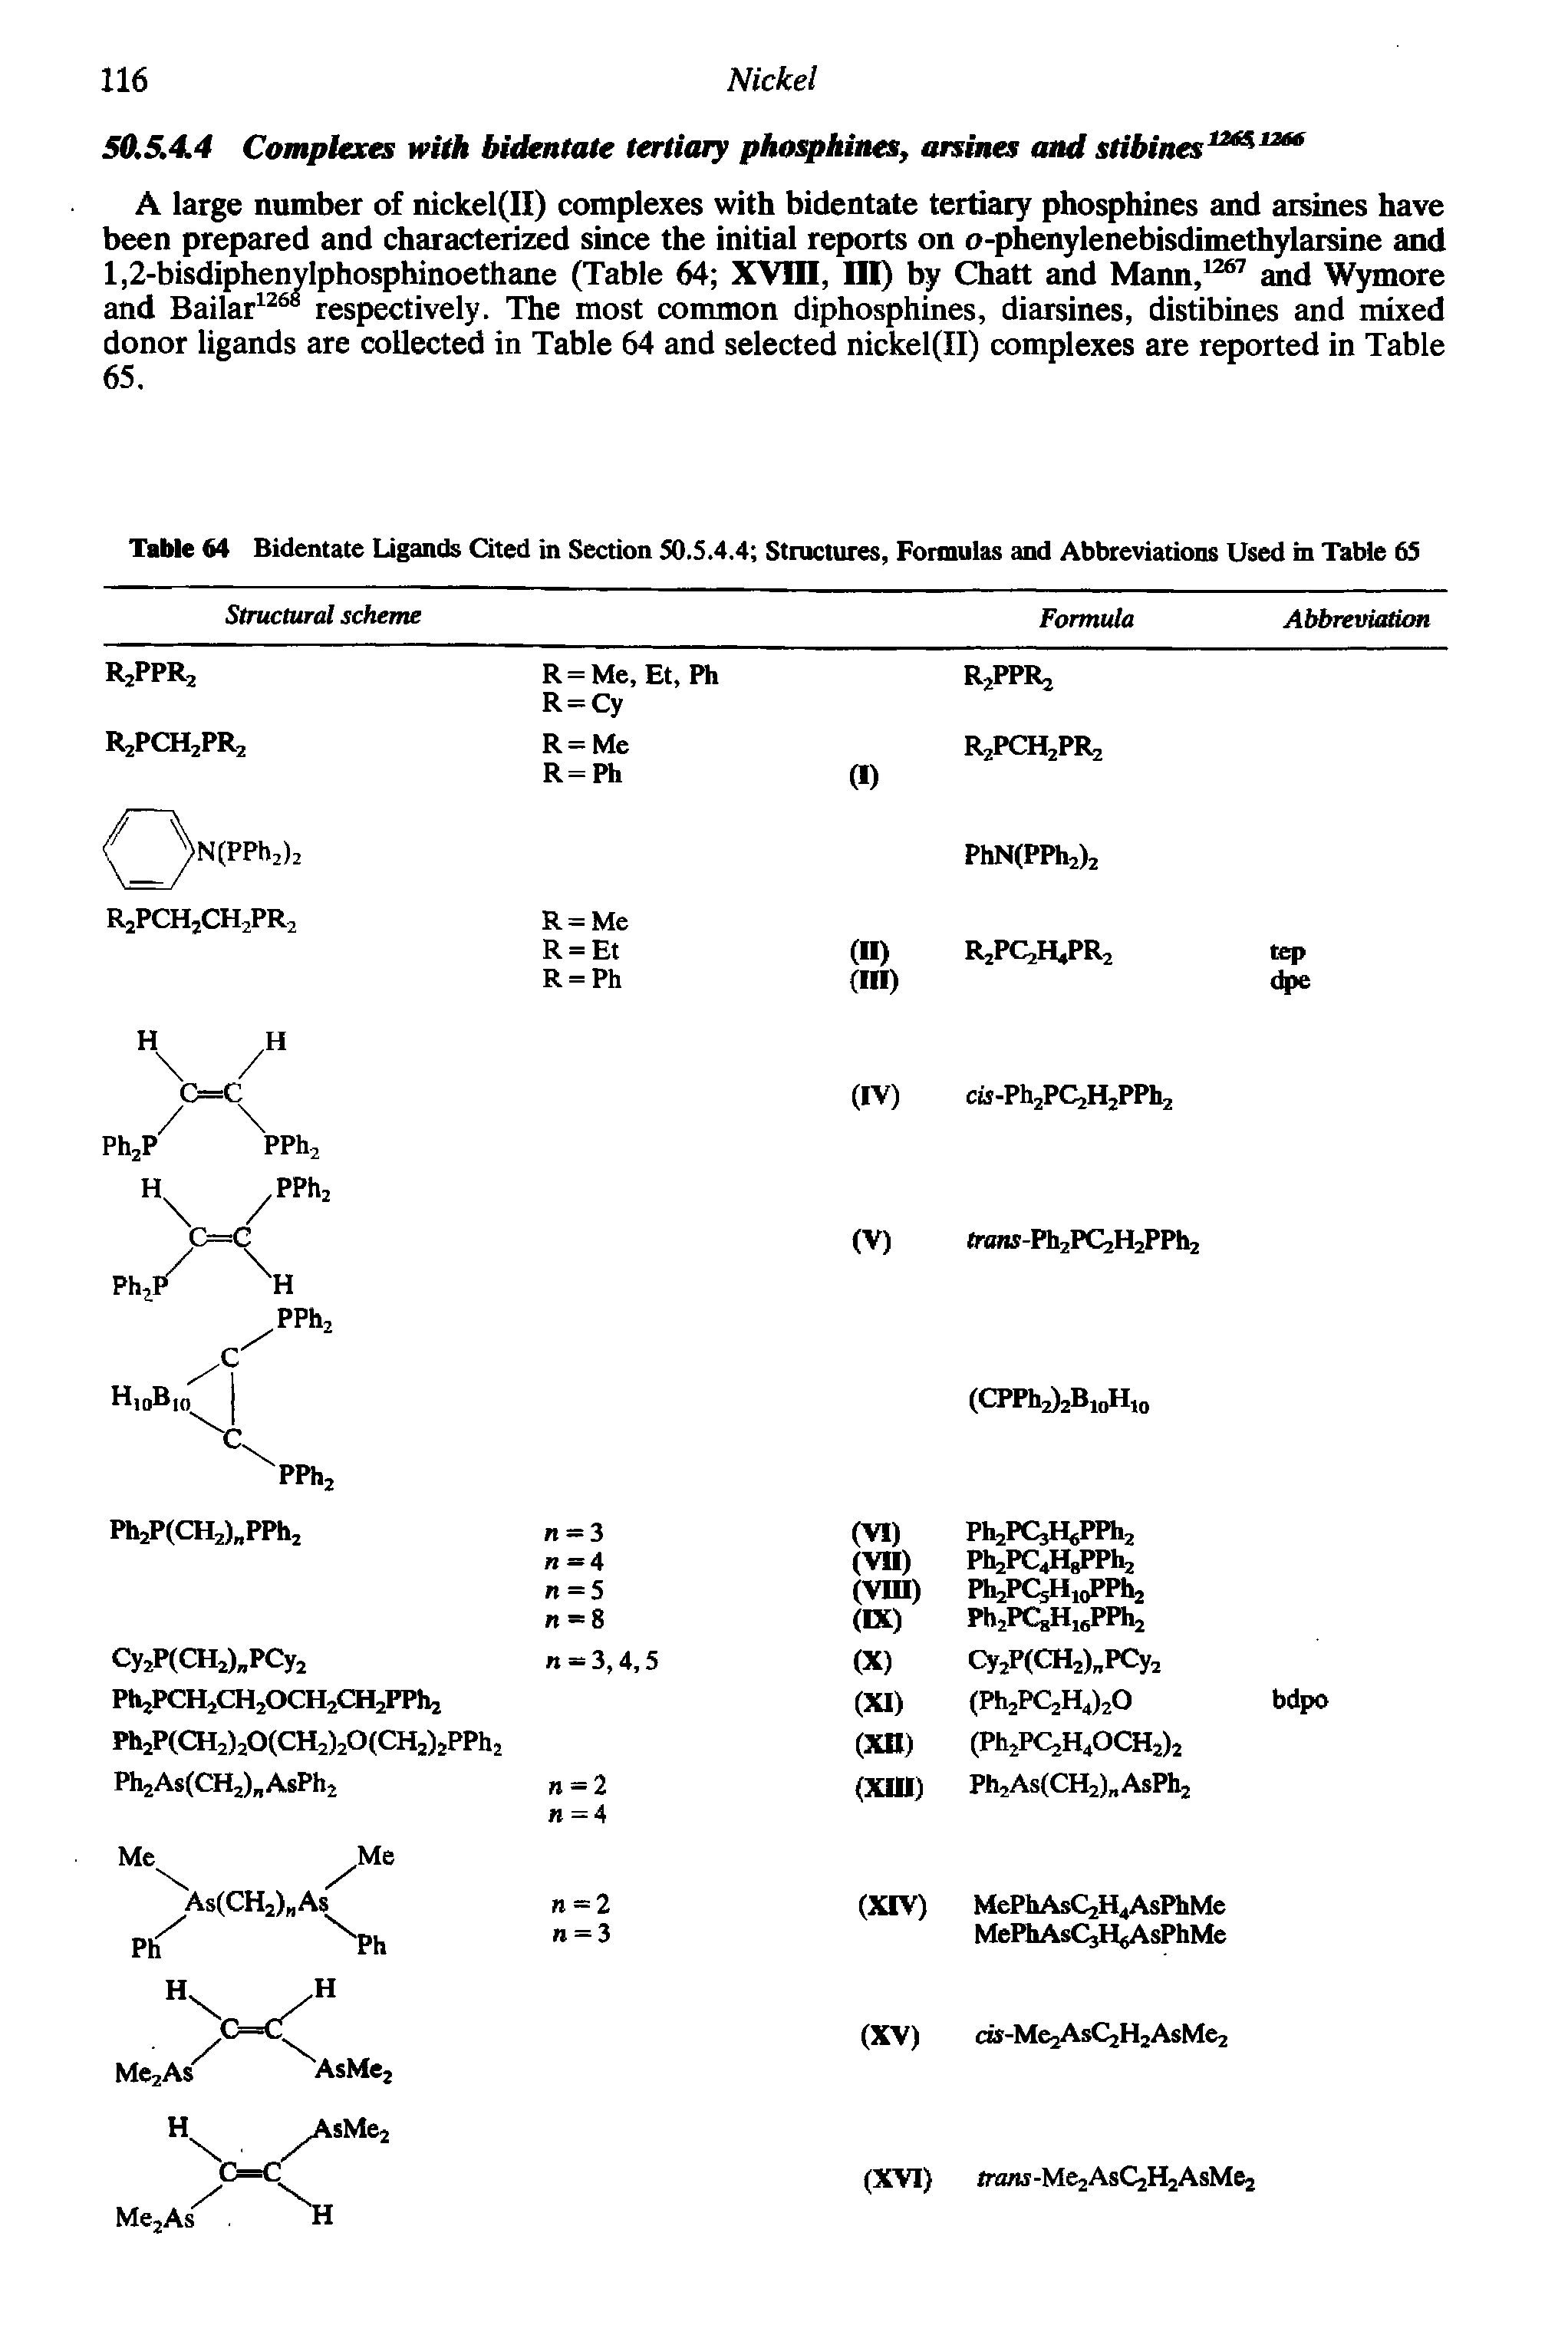 Table 64 Bidentate Ligands Cited in Section 50.5.4.4 Structures, Formulas and Abbreviations Used in Table 65...